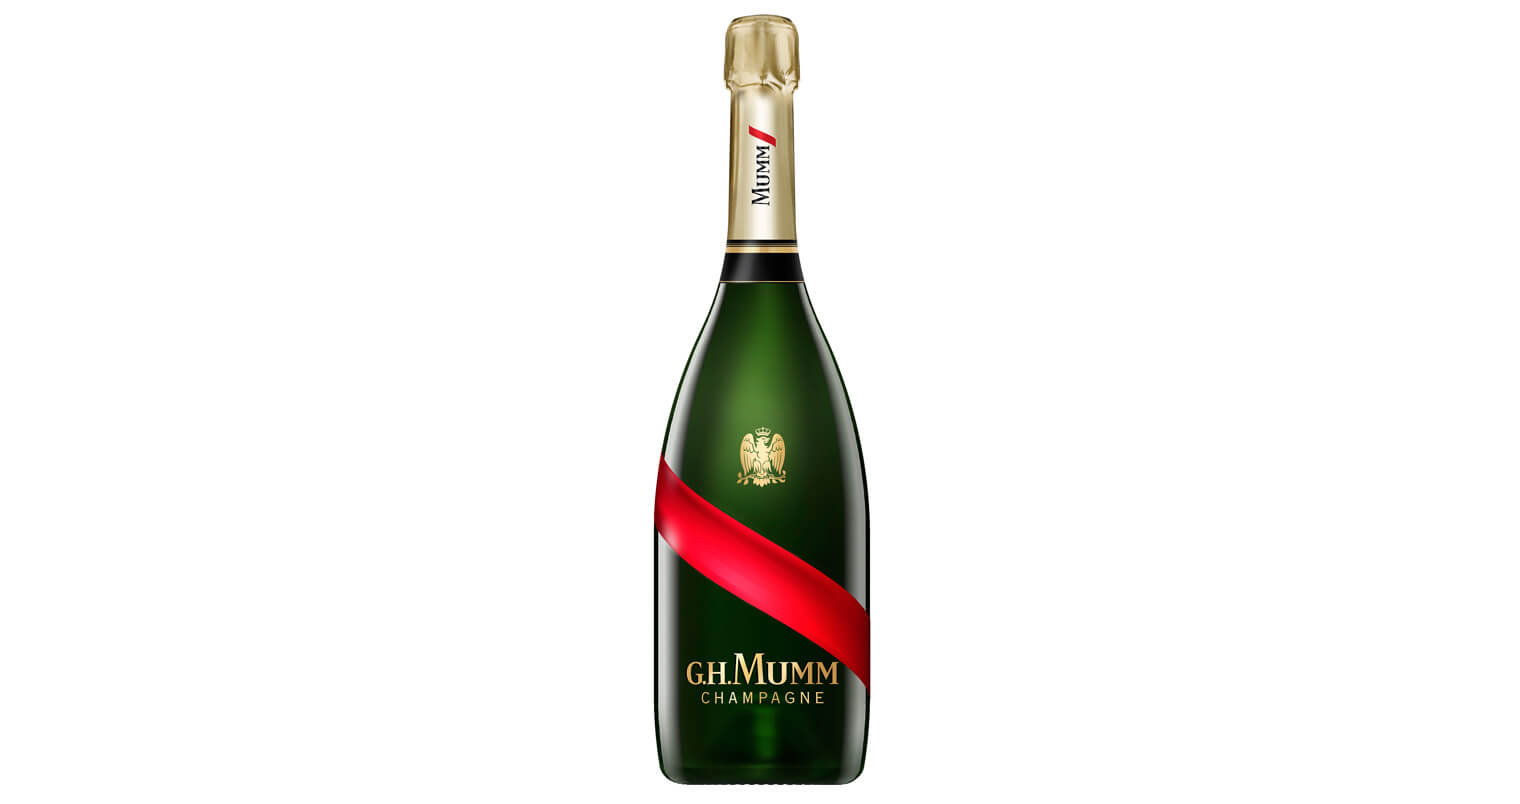 Maison Mumm Launches Revolutionary New Bottle in US, featured brands, featured image